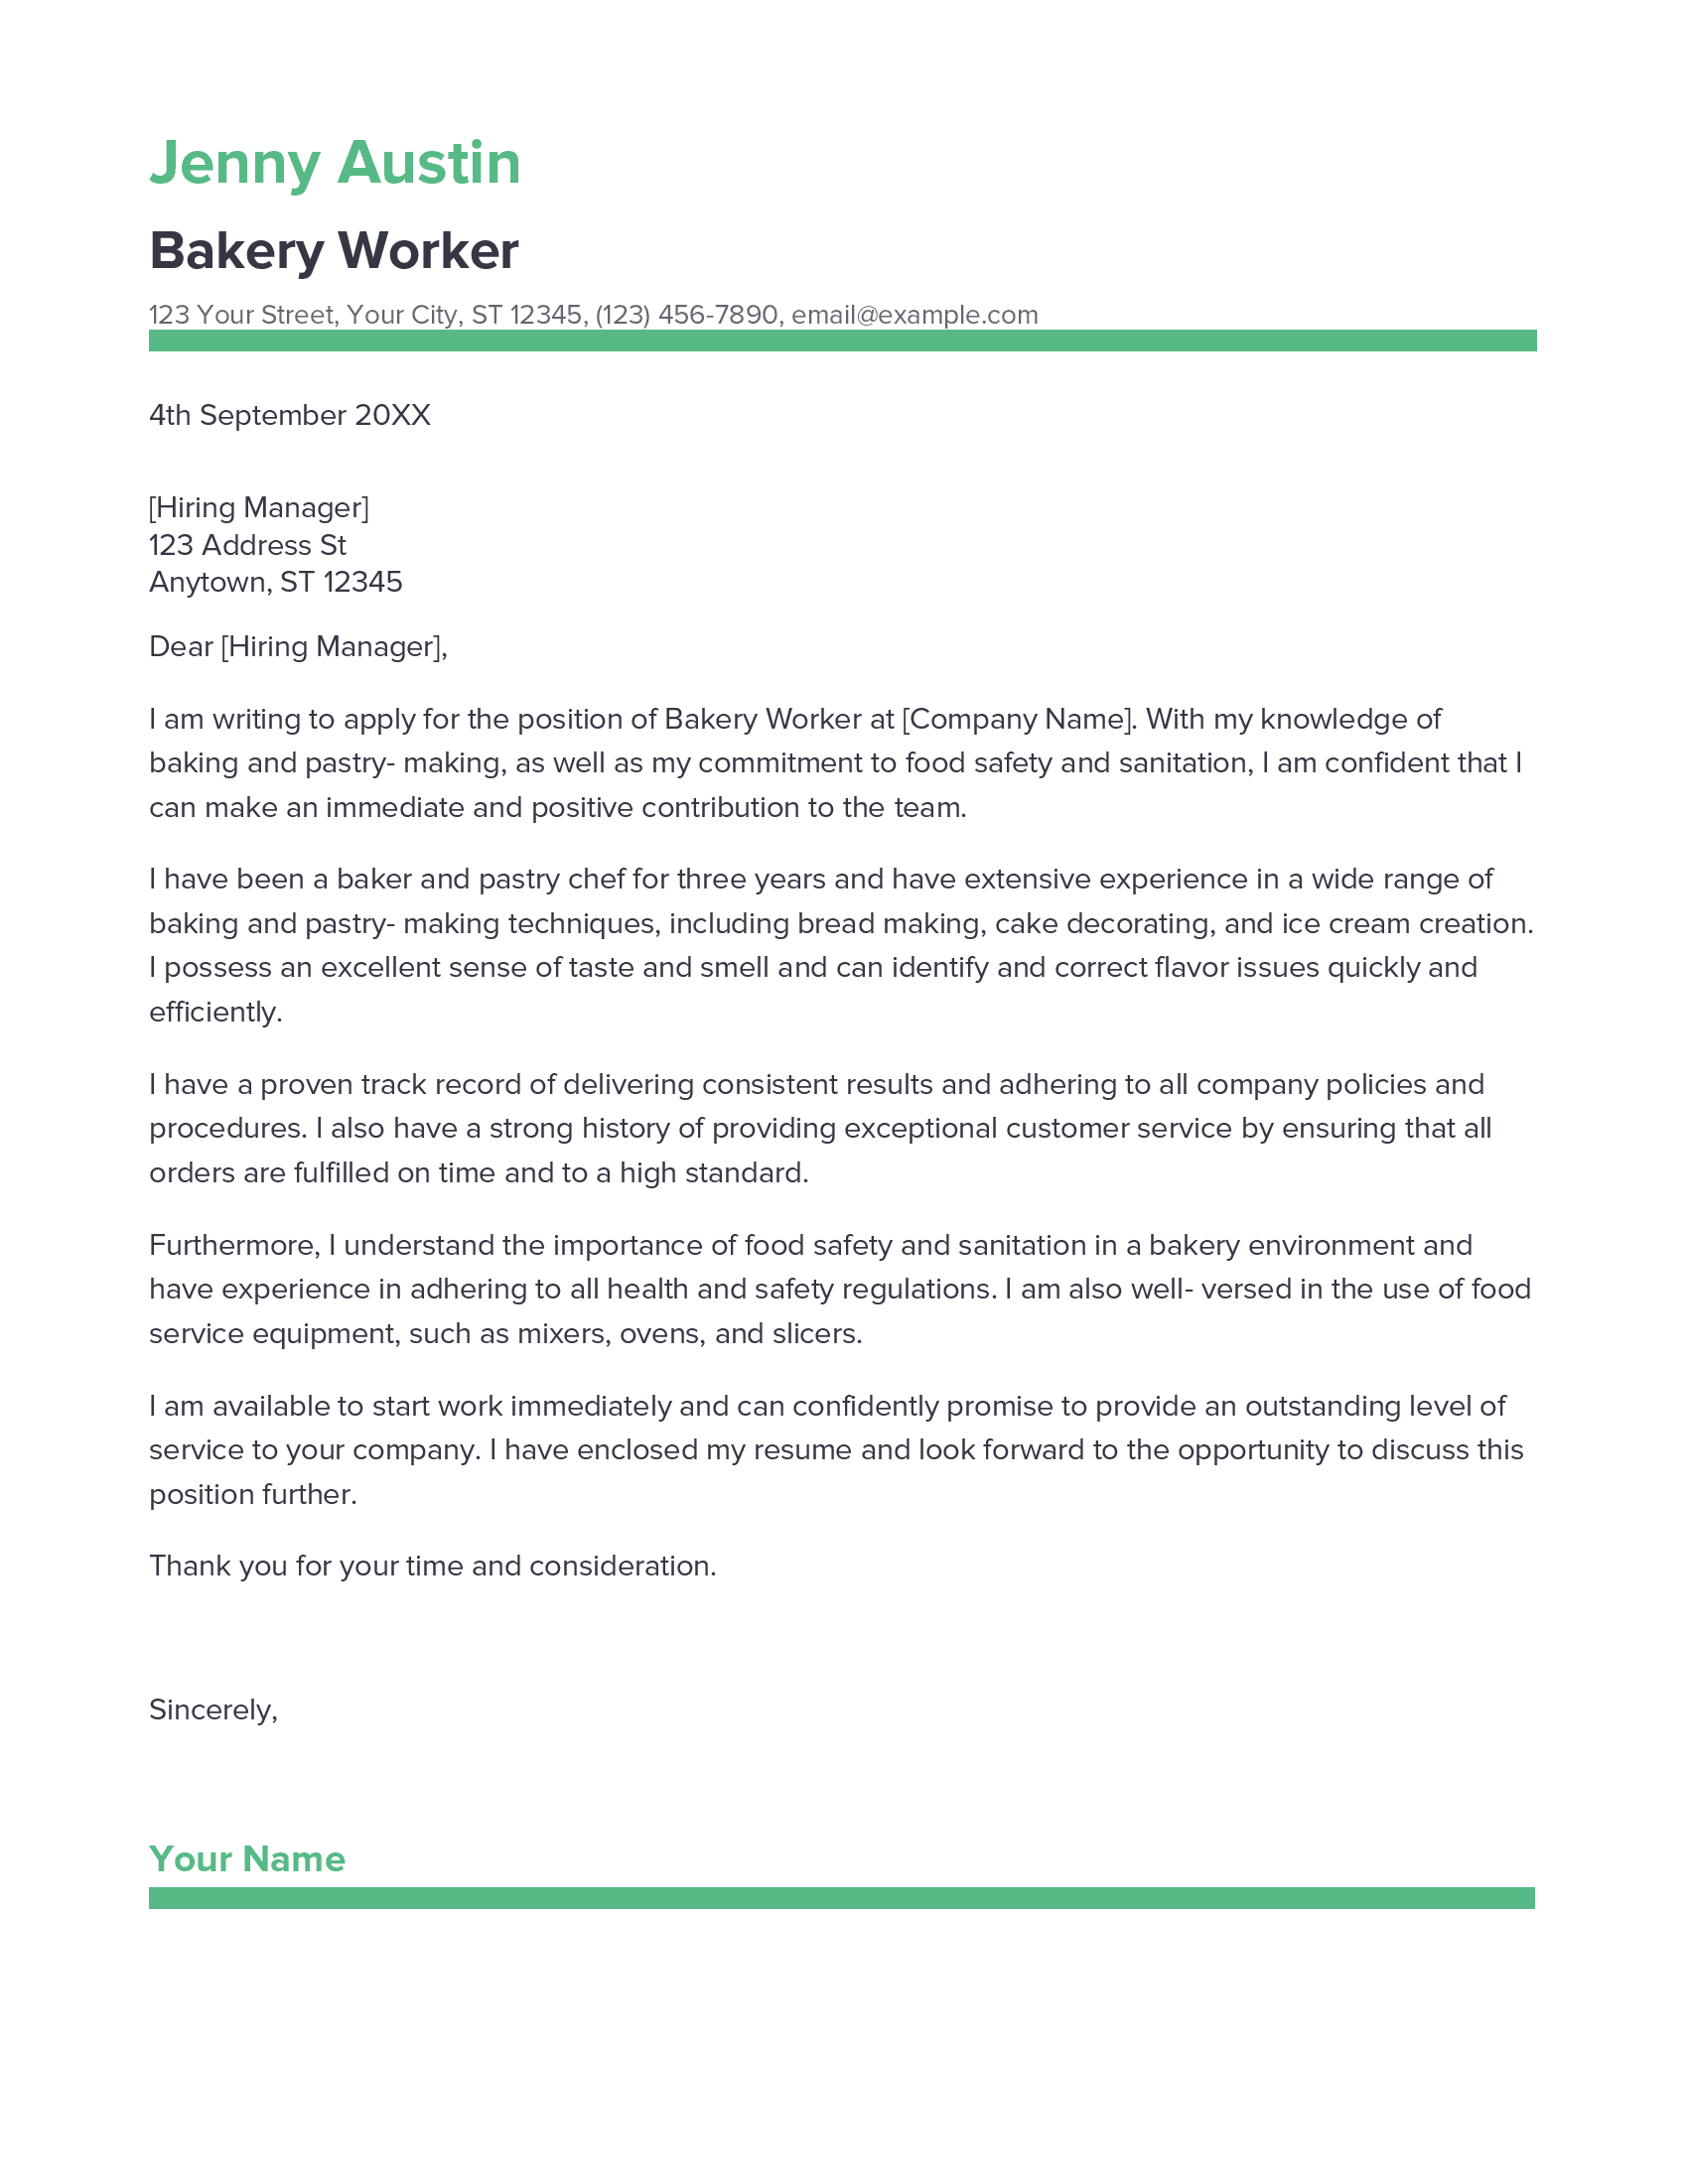 application letter as a bakery manager